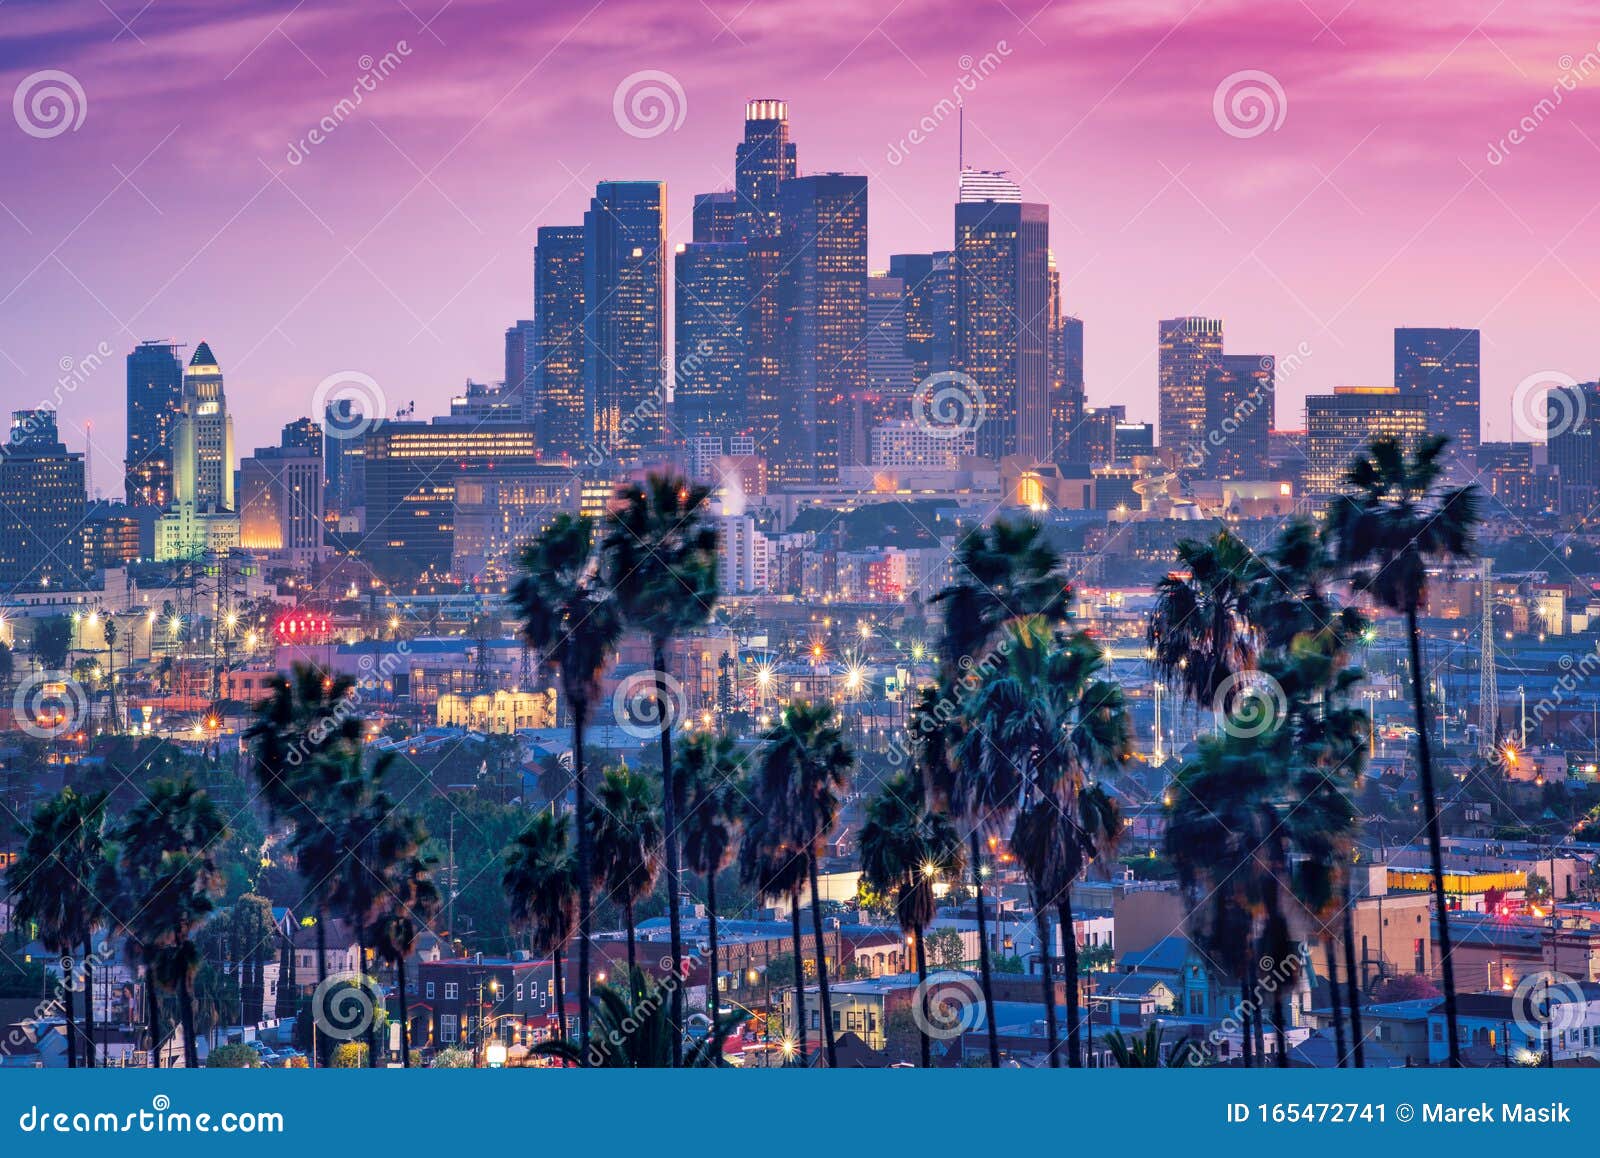 amazing sunset view with palm tree and downtown los angeles. california, usa